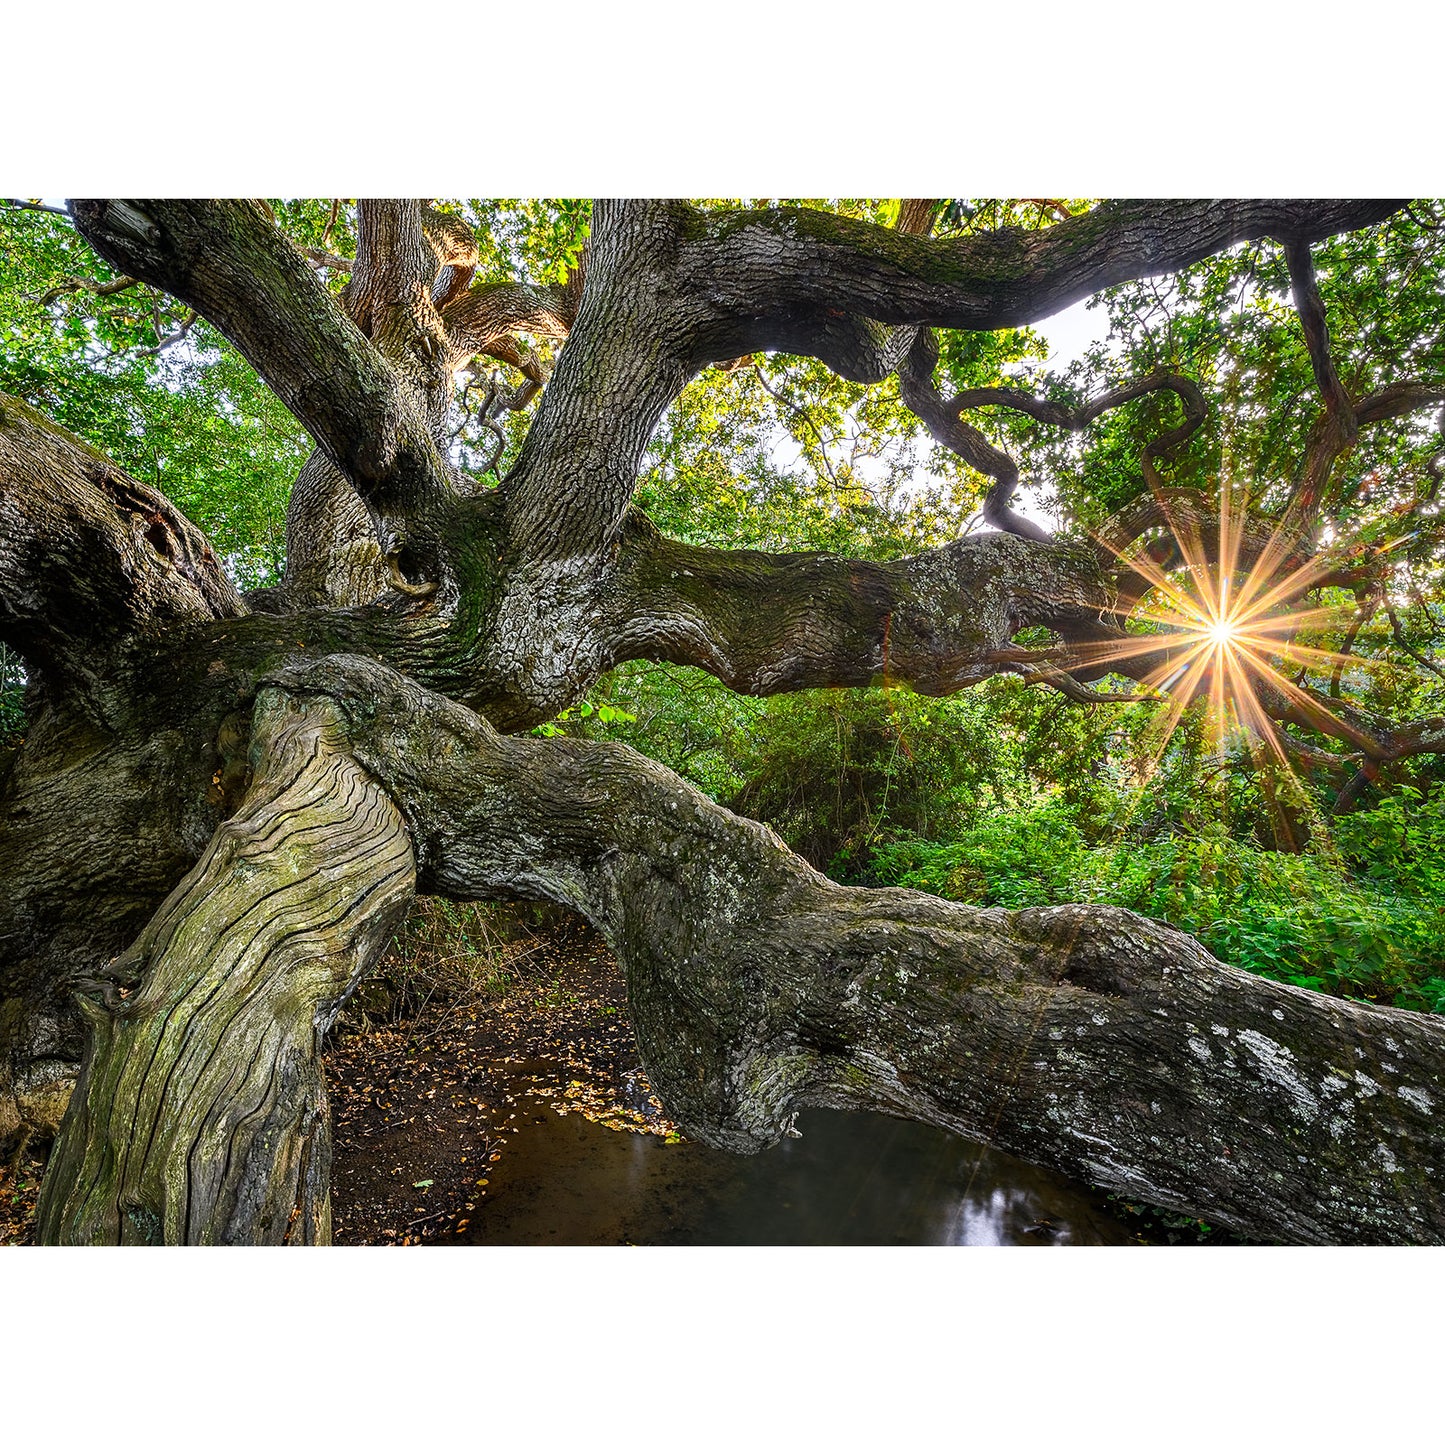 Majestic The Dragon Tree with gnarled branches against the backdrop of a sunburst through the foliage on Isle by Brighstone.